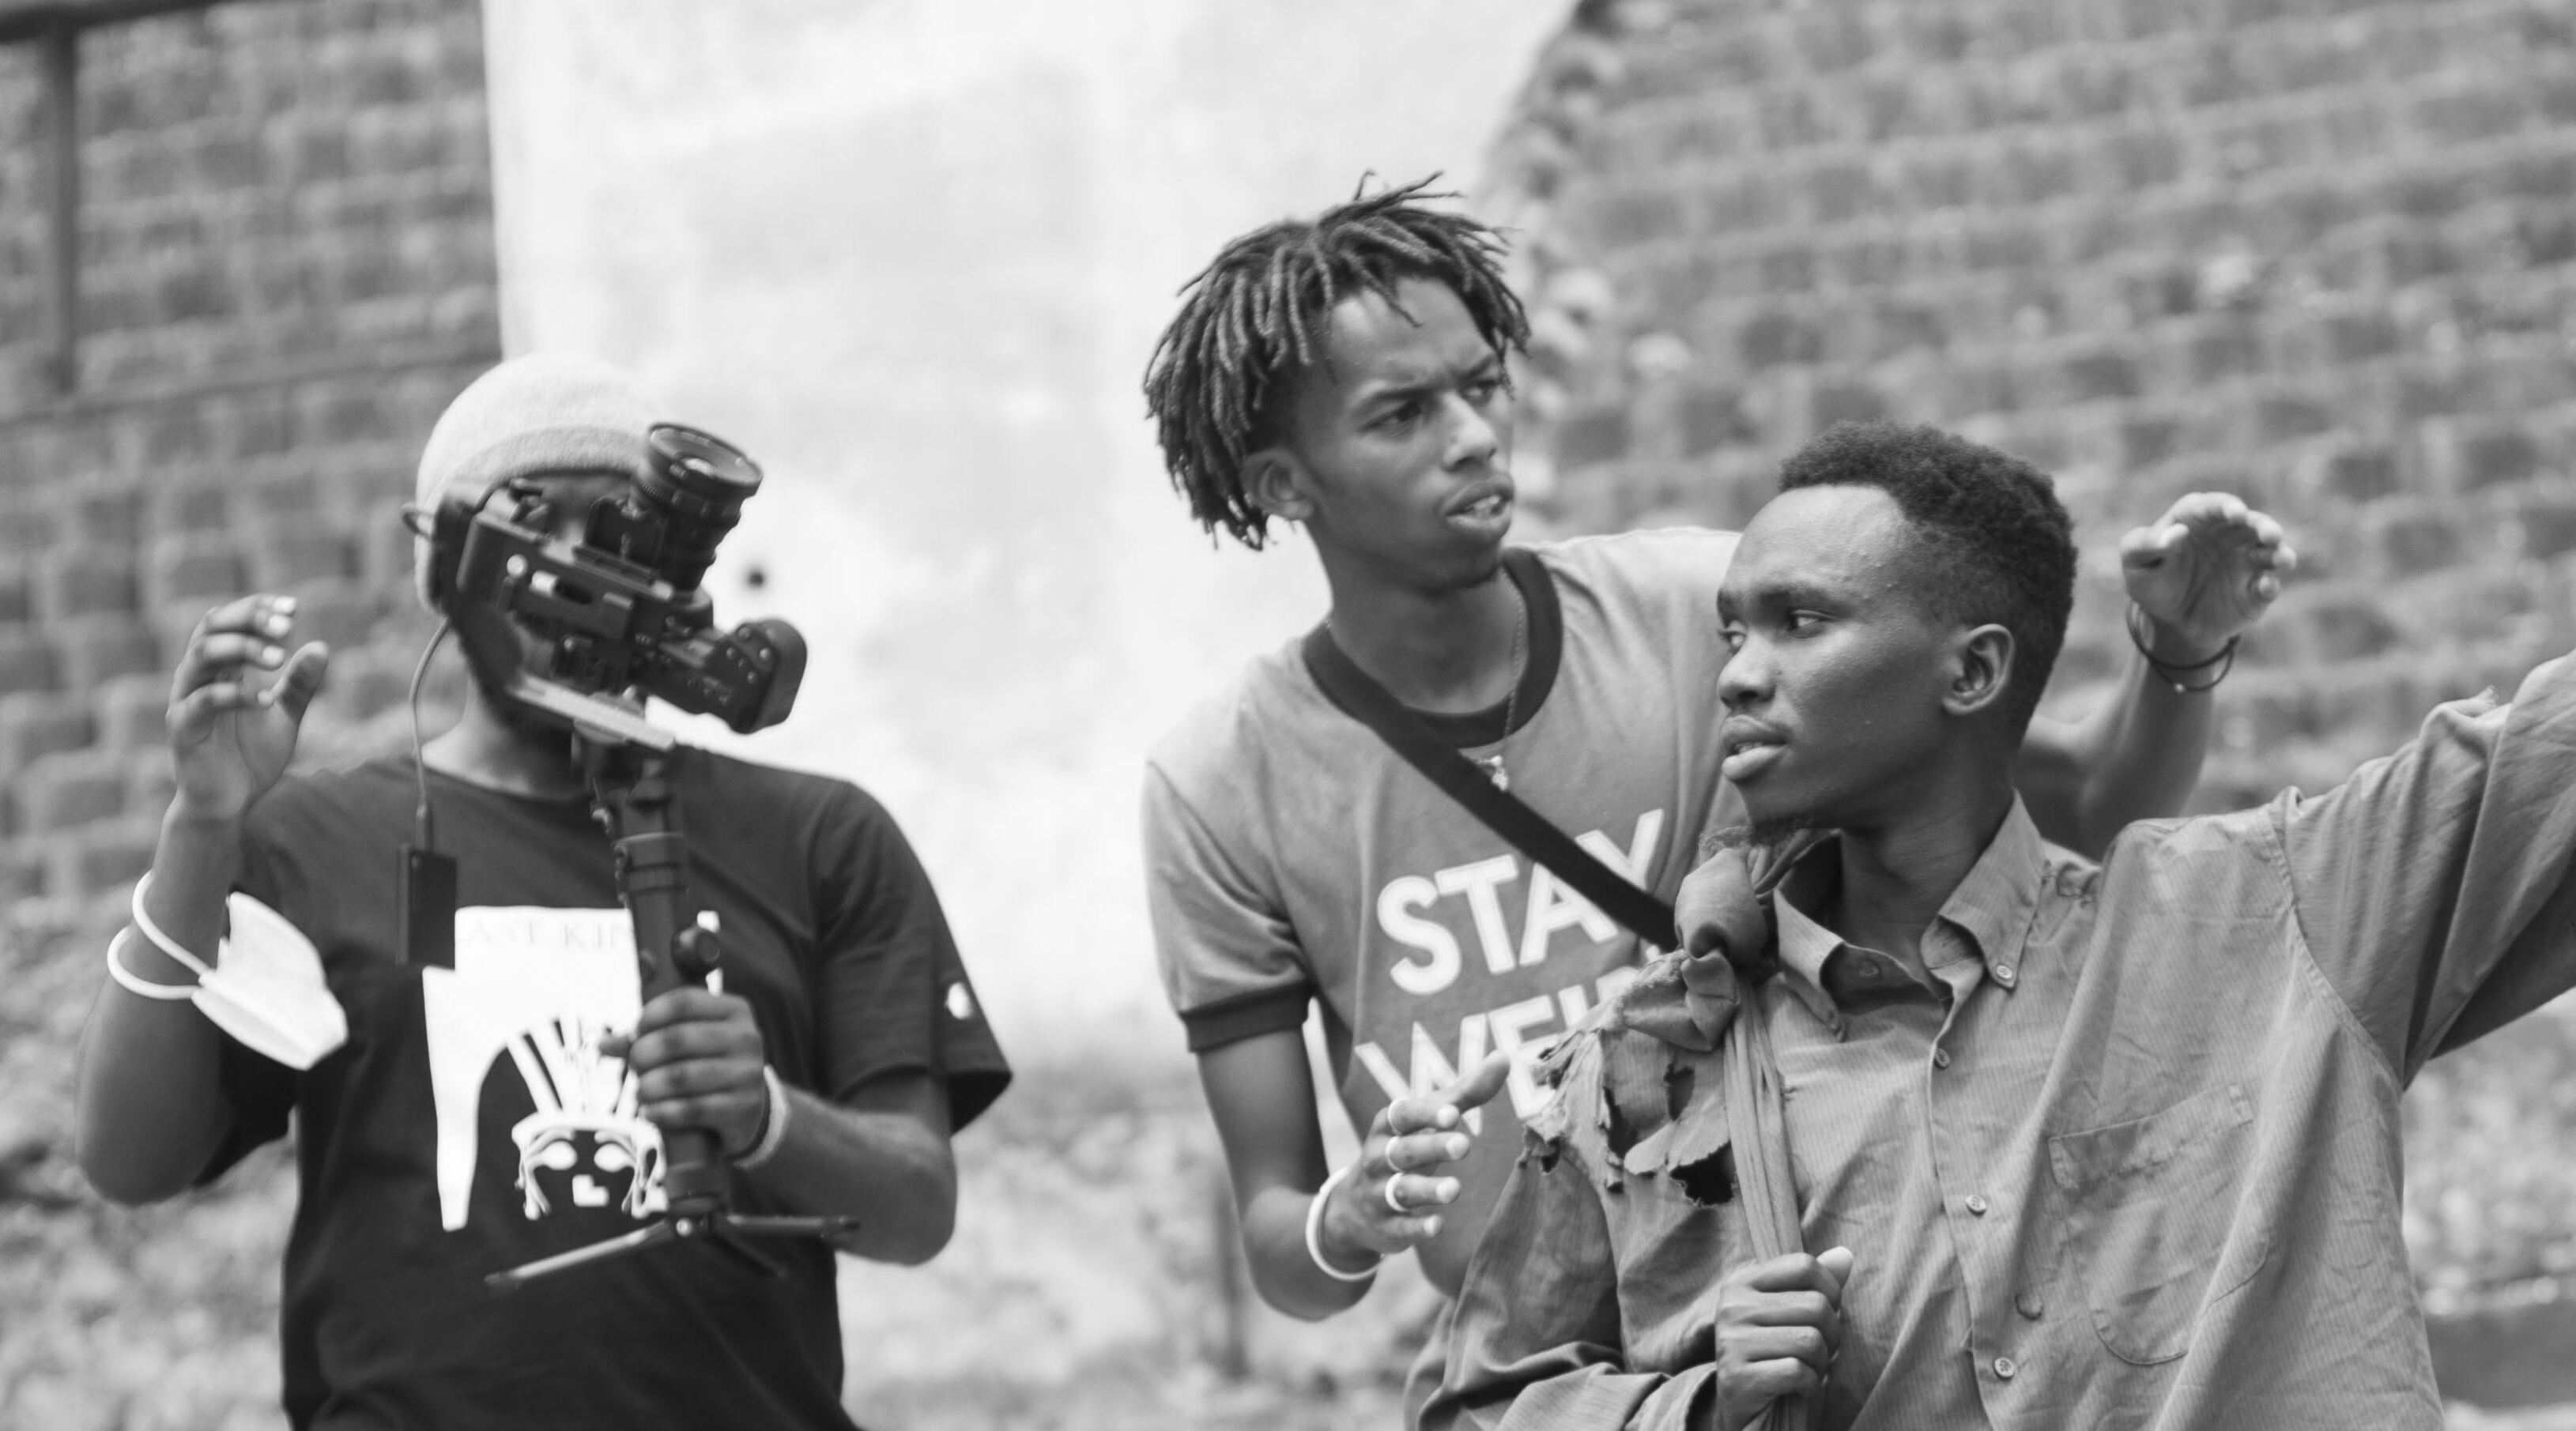 Khalid Steve Shema (C), the poem director, and David Ndagijimana, commonly known as No Stress, during the shooting of u2018The Joiin of Threeu2019 poem.